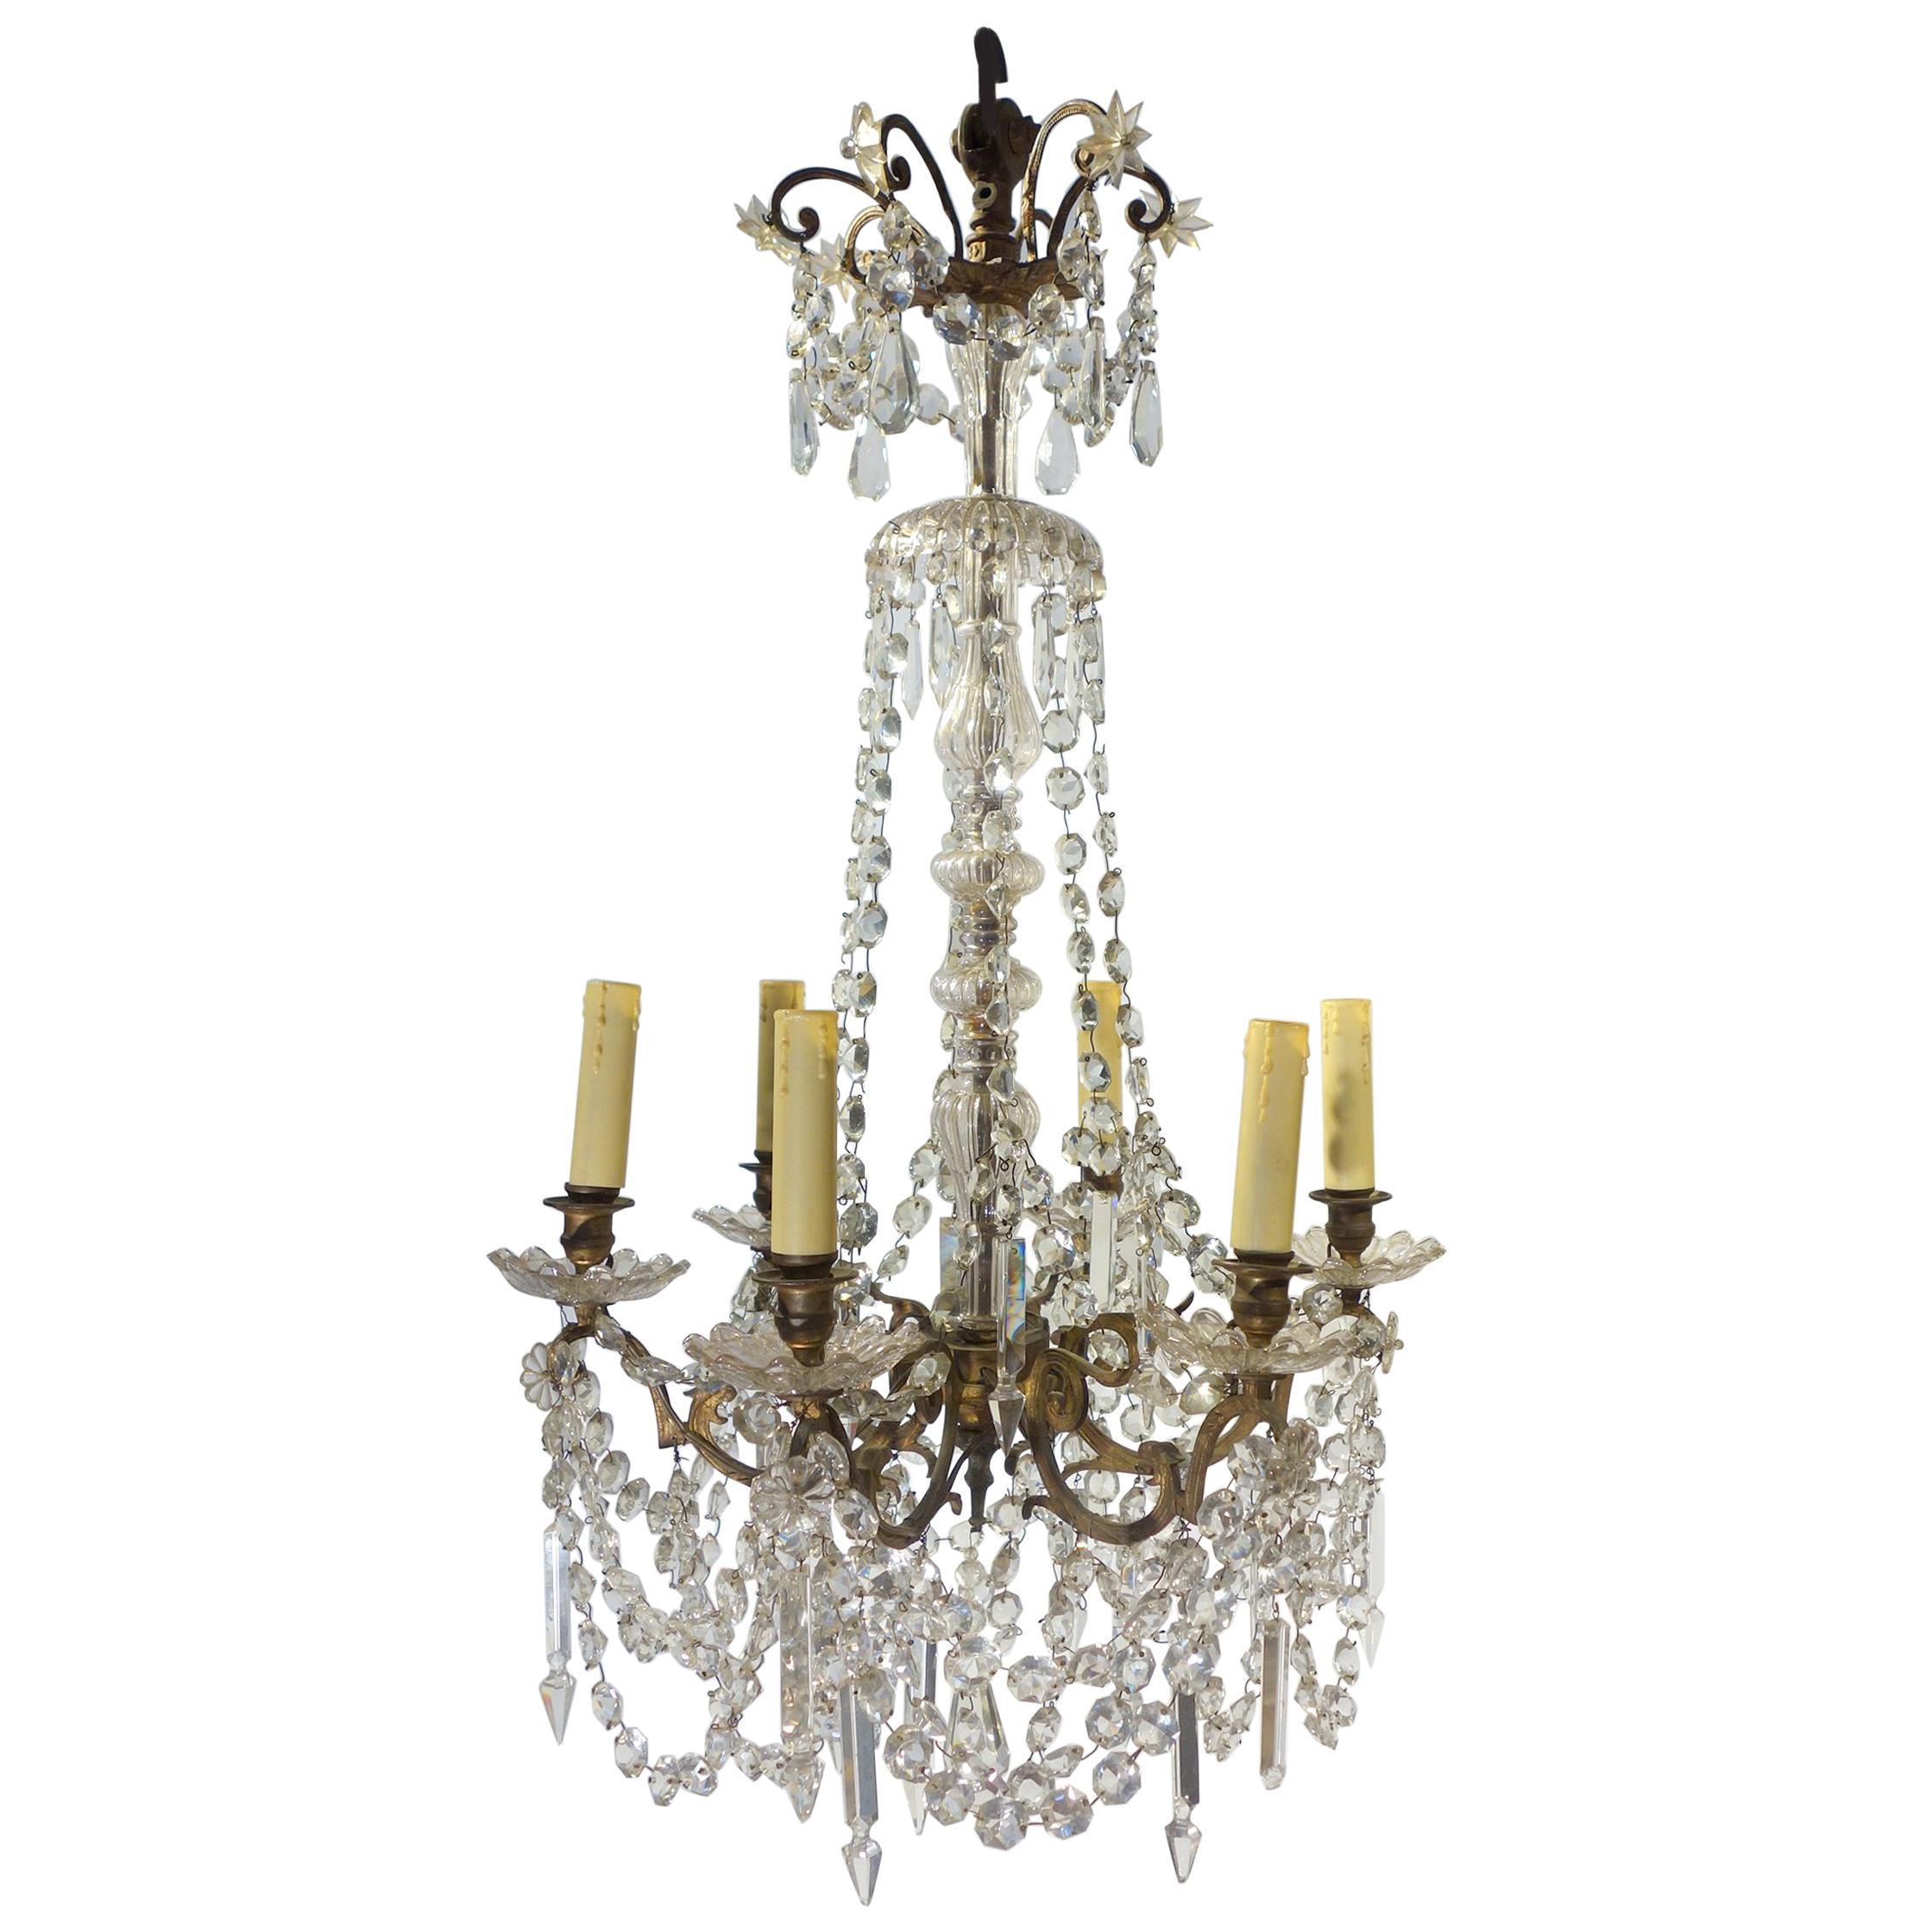 Antique Italian Empire Style Brass Rocaille Dragons on 6-Arm Crystal Chandelier For Sale